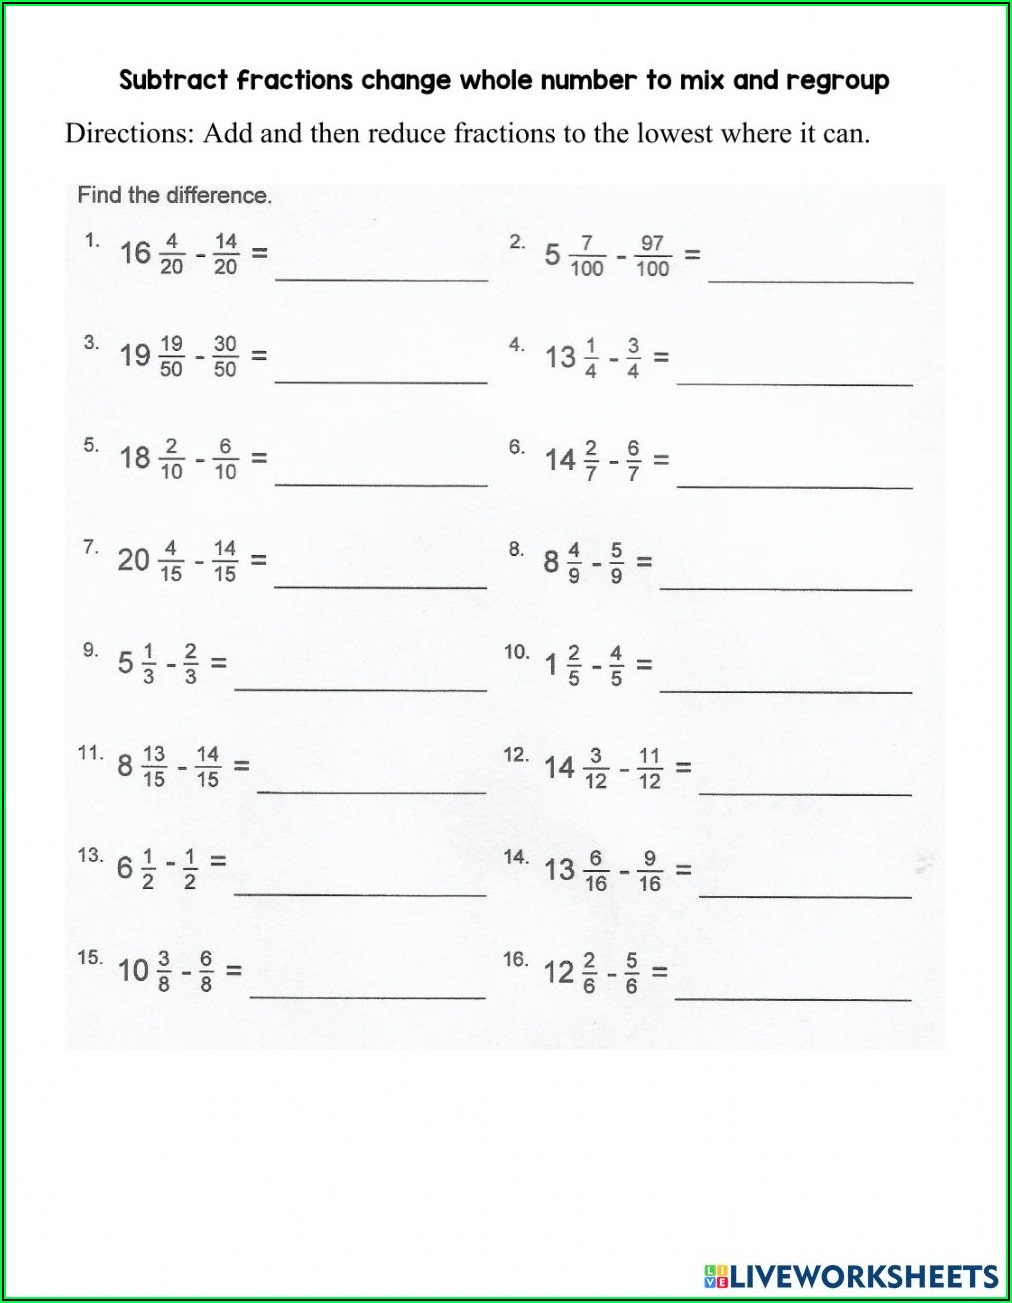 Subtracting Mixed Numbers With Borrowing Worksheet Pdf